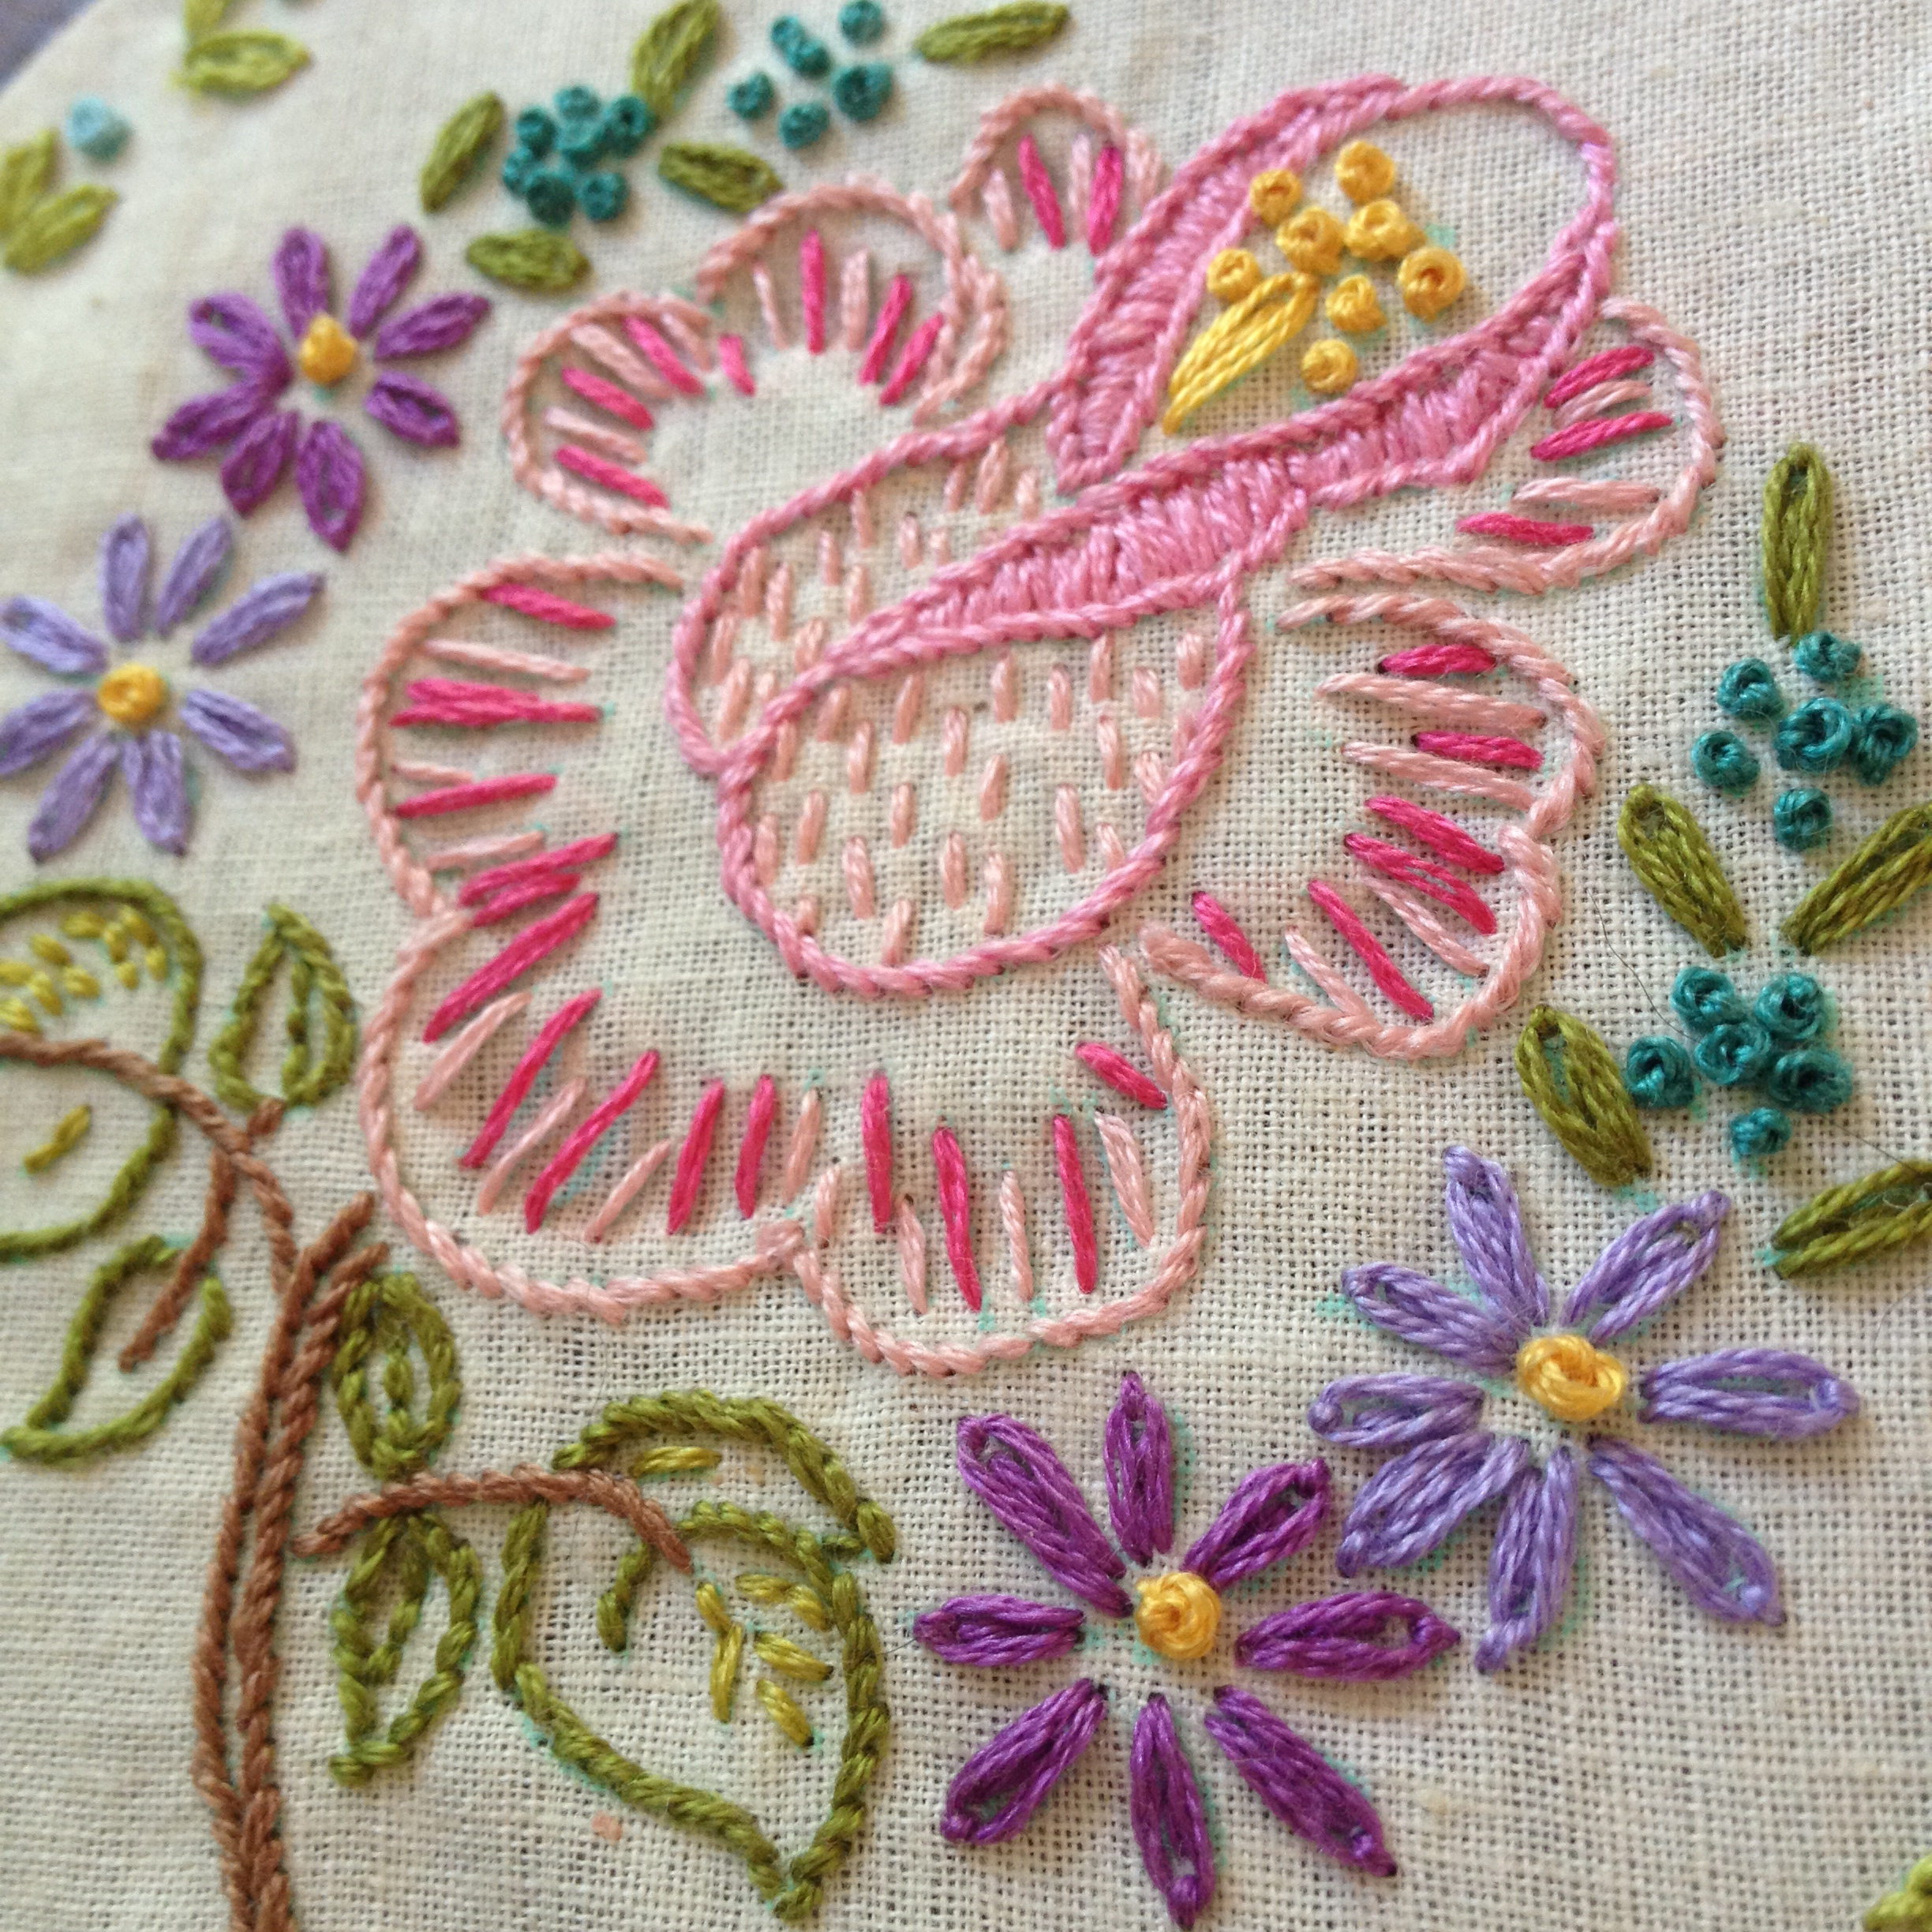 Vintage Hand Embroidery Patterns Vintage Hand Embroidery Patterns My Original Inspiration In The